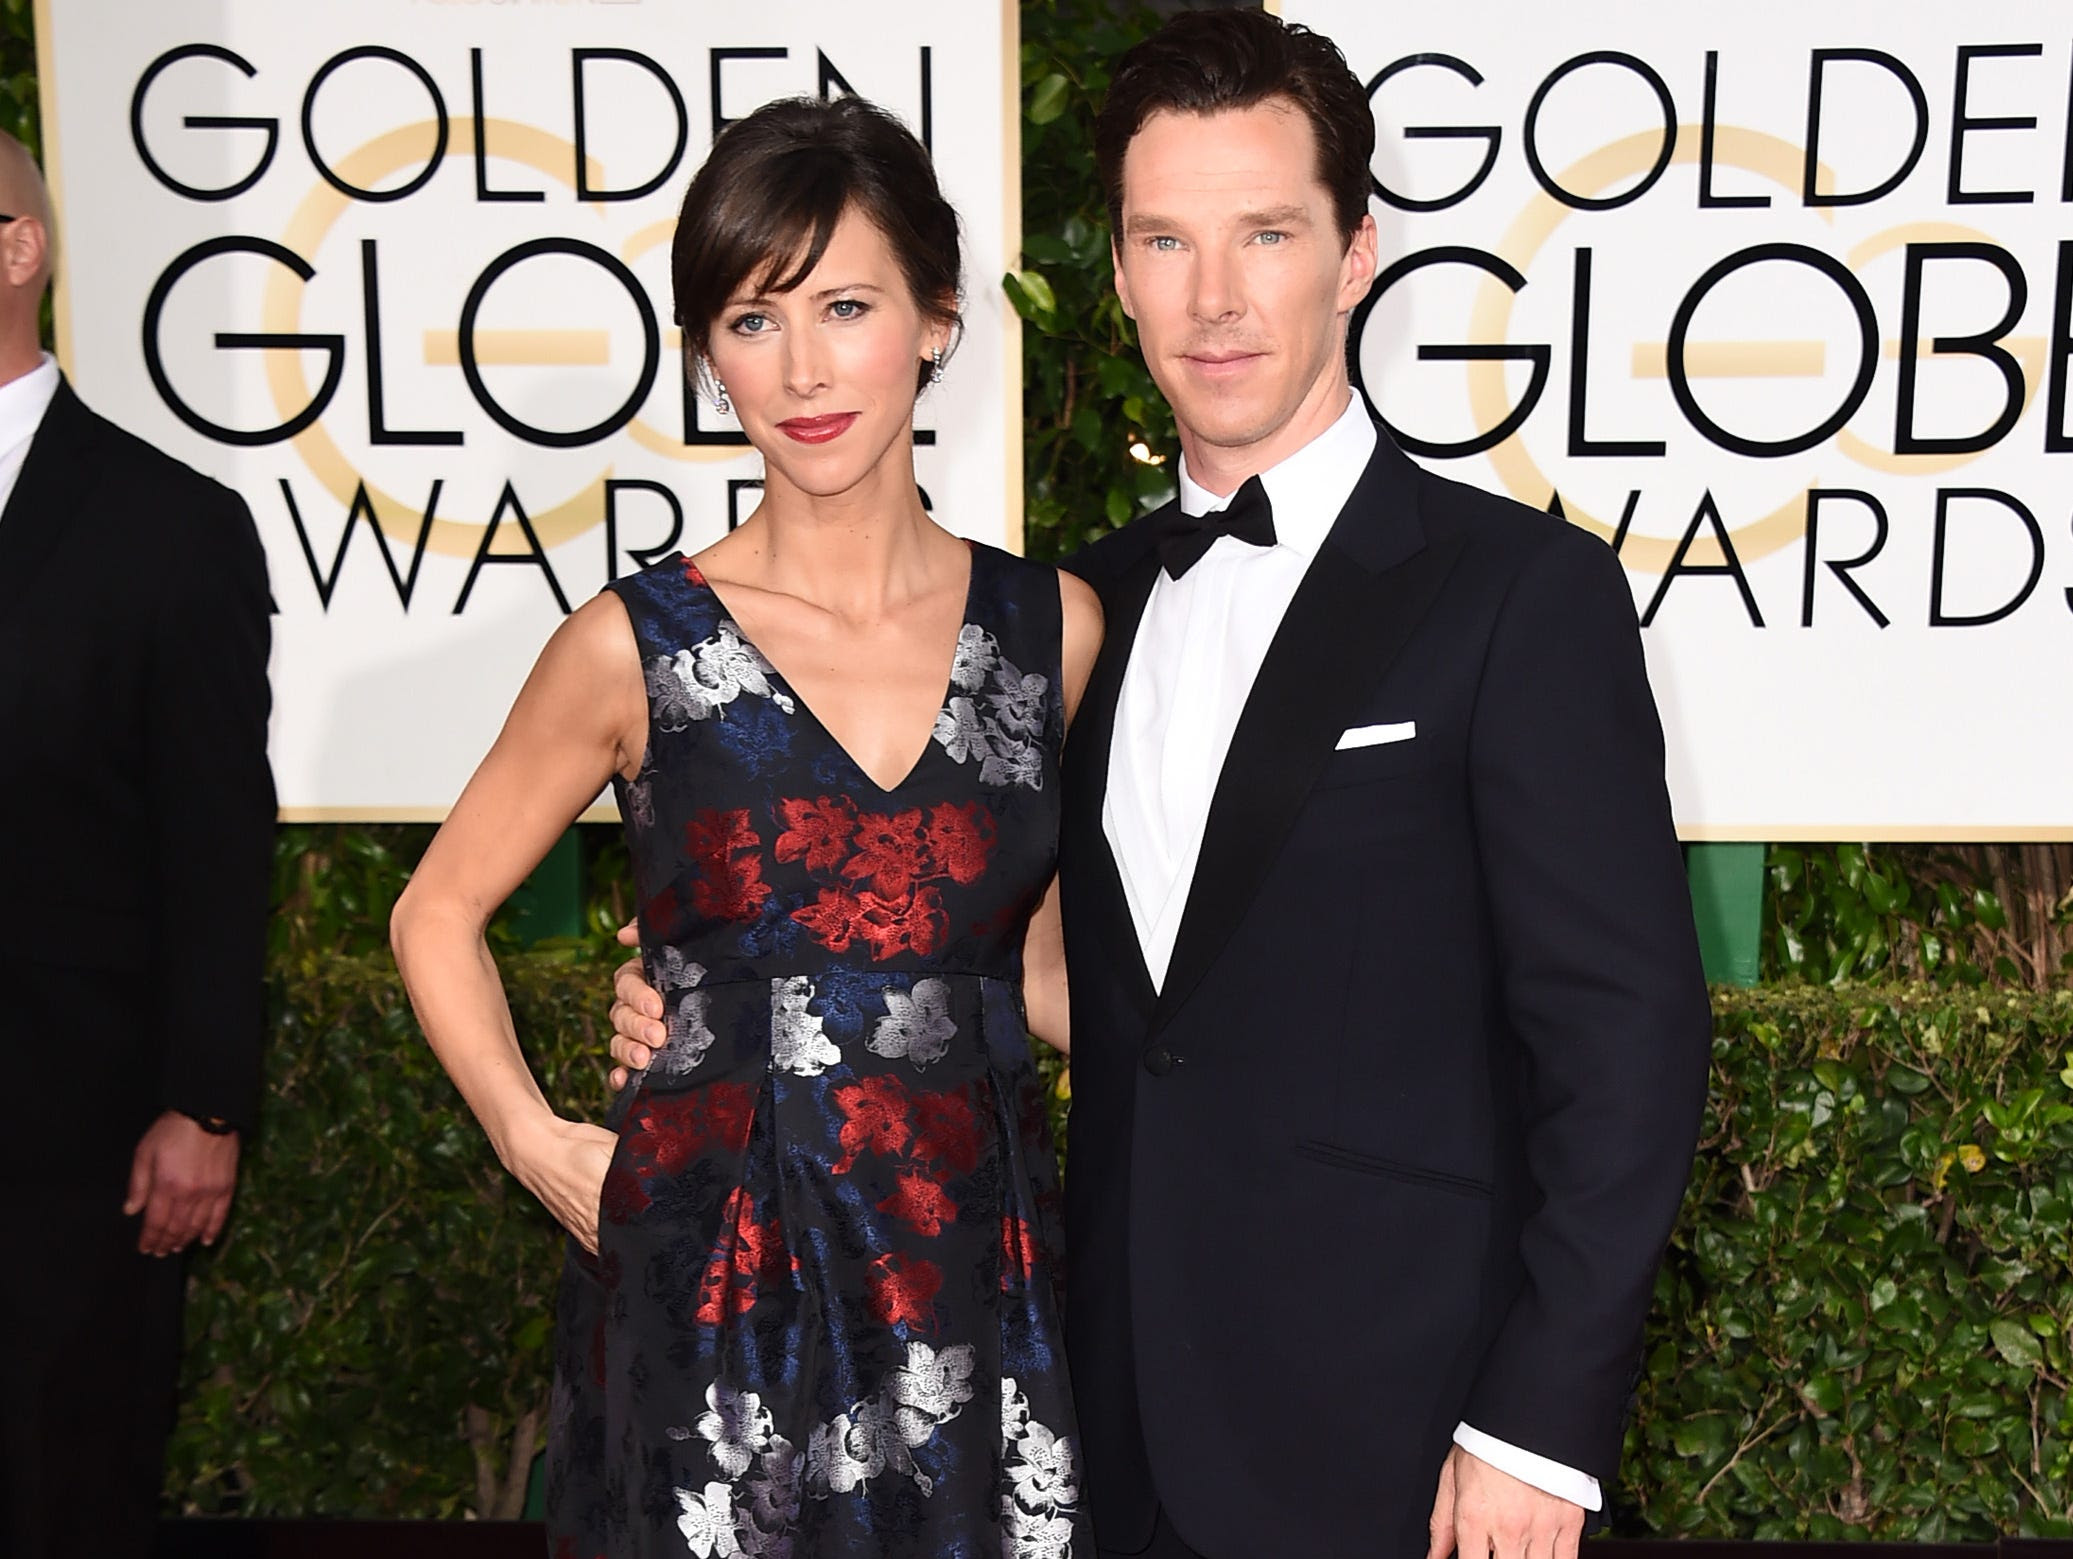 Sophie Hunter, left, and actor Benedict Cumberbatch arrive at the 72nd annual Golden Globe Awards on Jan. 11, 2015.